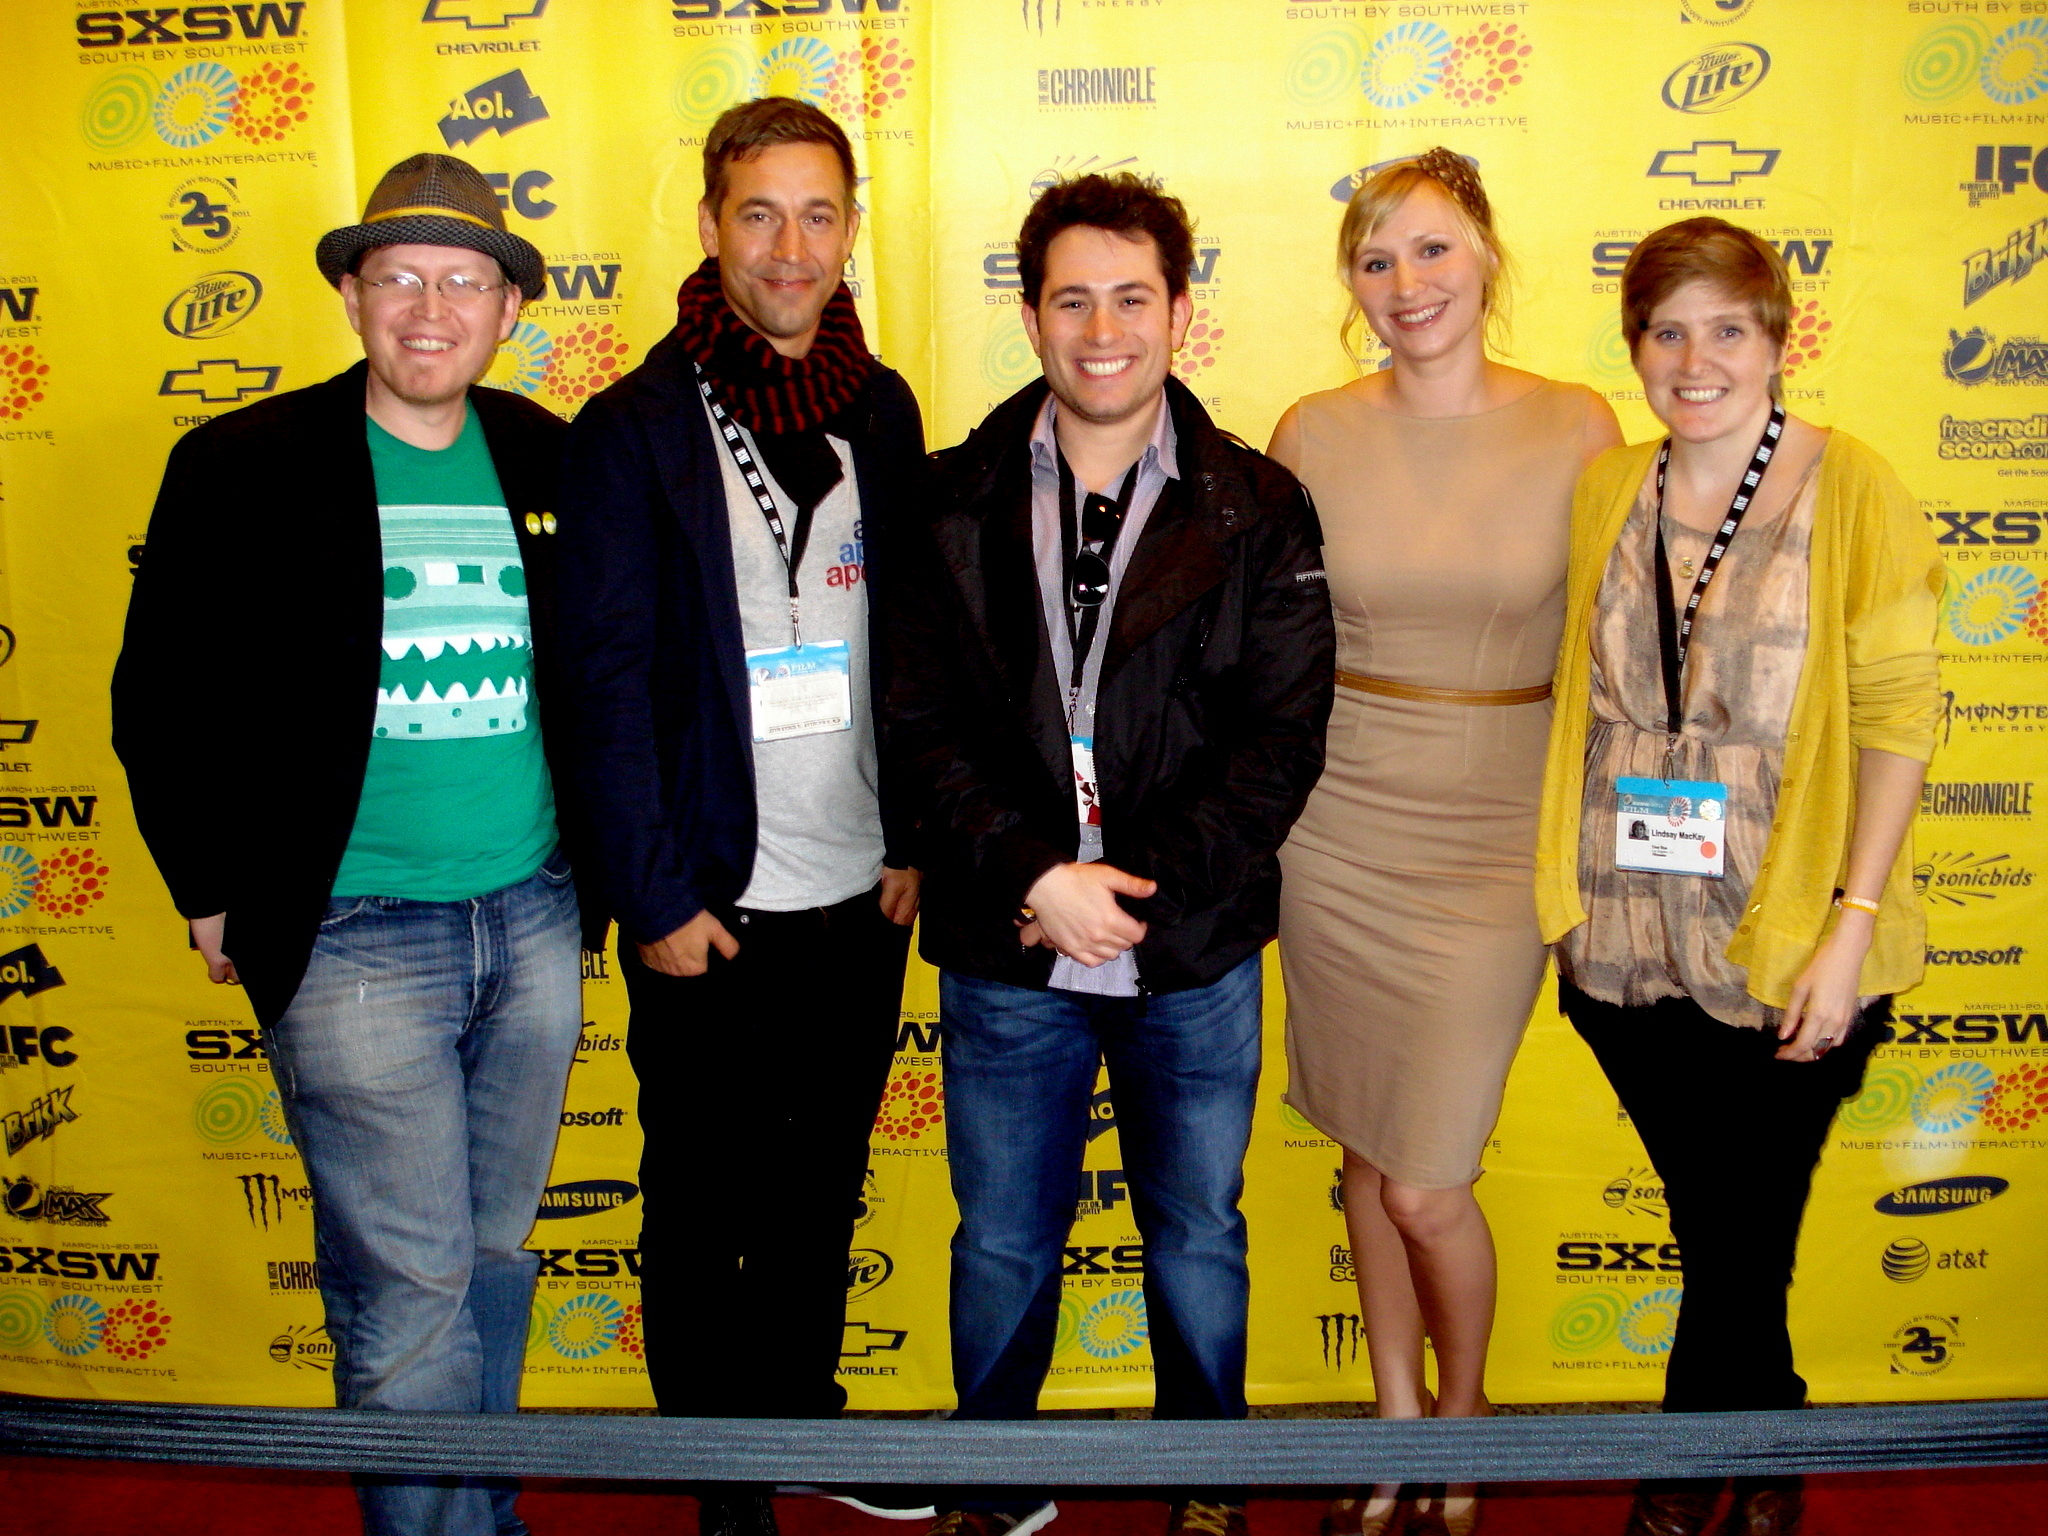 2011 SXSW Red Carpet with the cast and crew of 